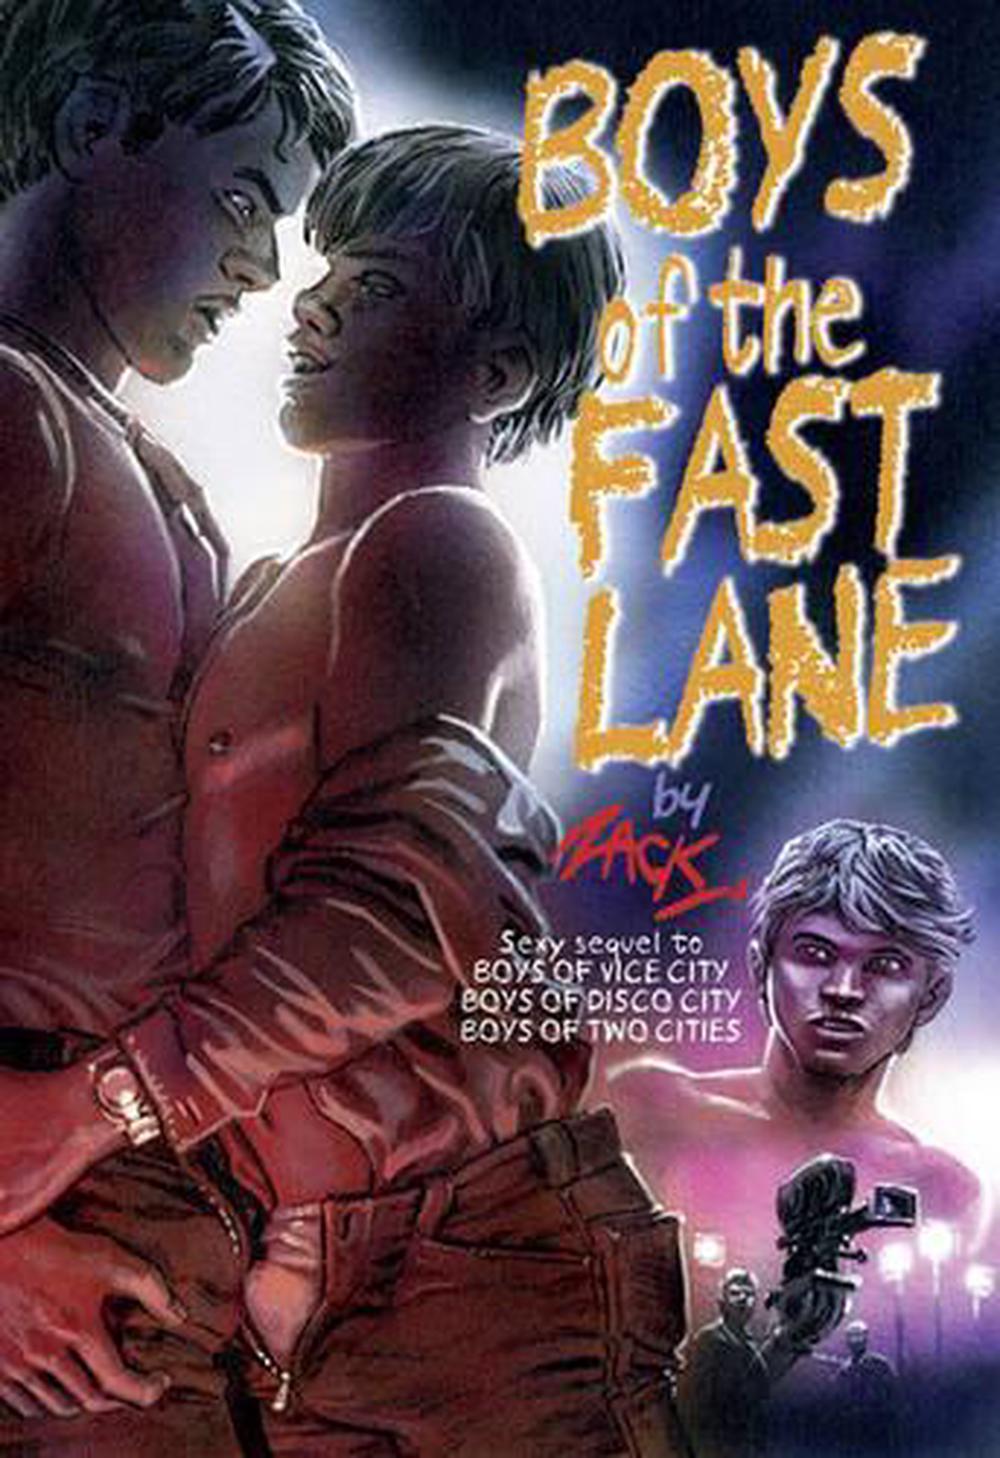 Boys Of The Fast Lane A Gay Erotic Novel By Zack English Paperback 9182